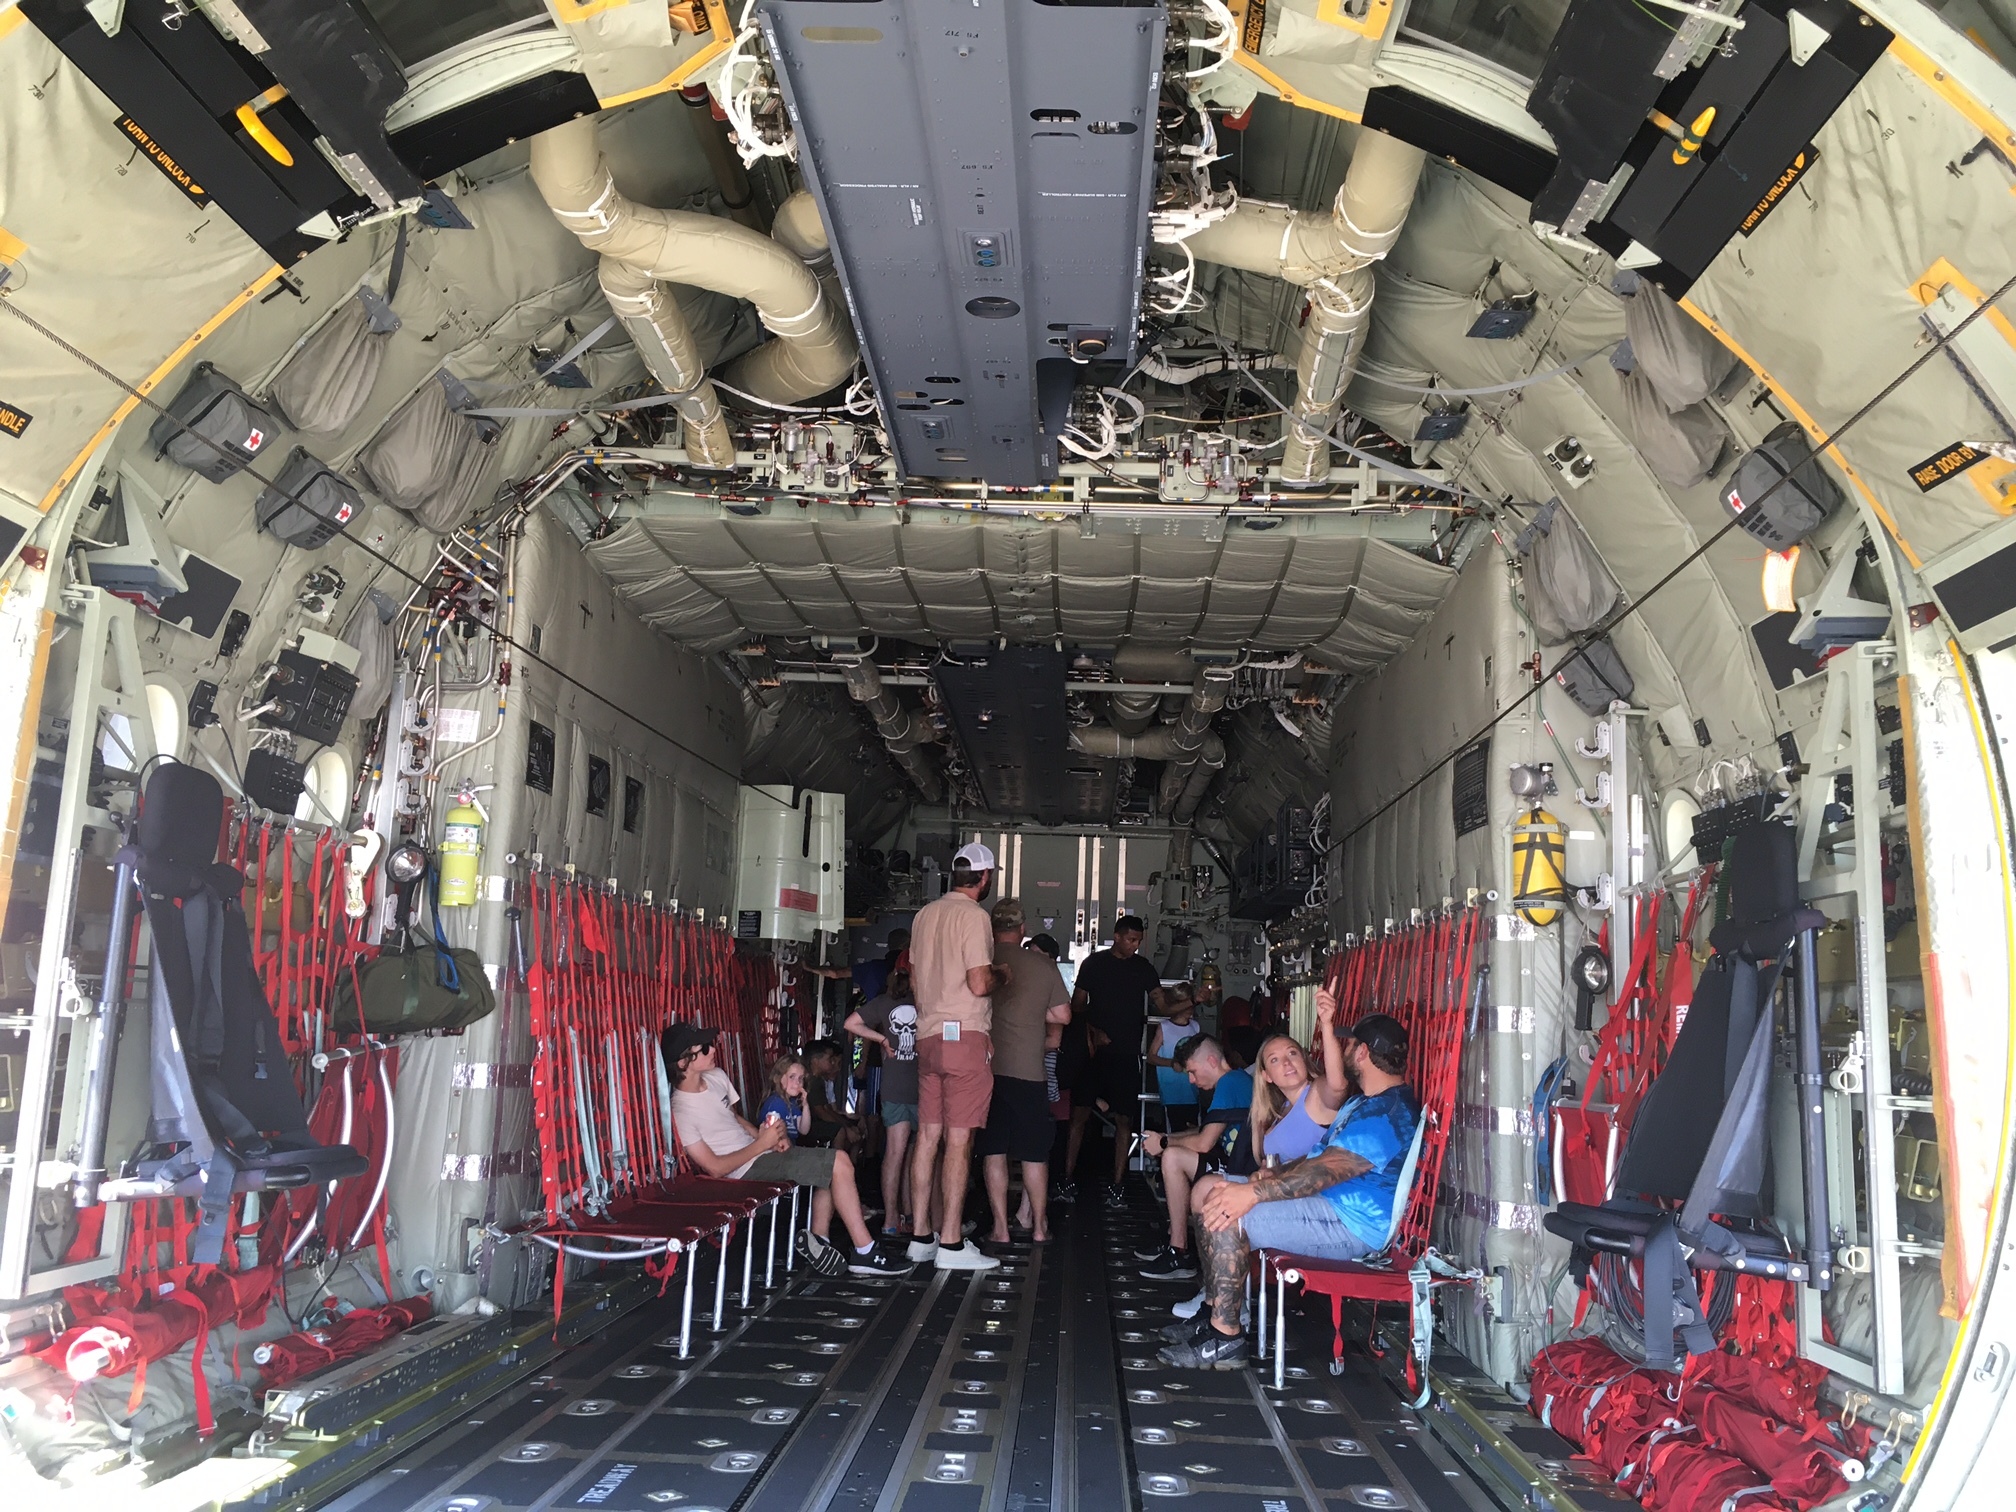 Inside the Combat King. Tours and demostrations of equipment and aircraft were offered during the 'military block party' hosted by the 106th Rescue Wing in Westhampton.     KITTY MERRILL